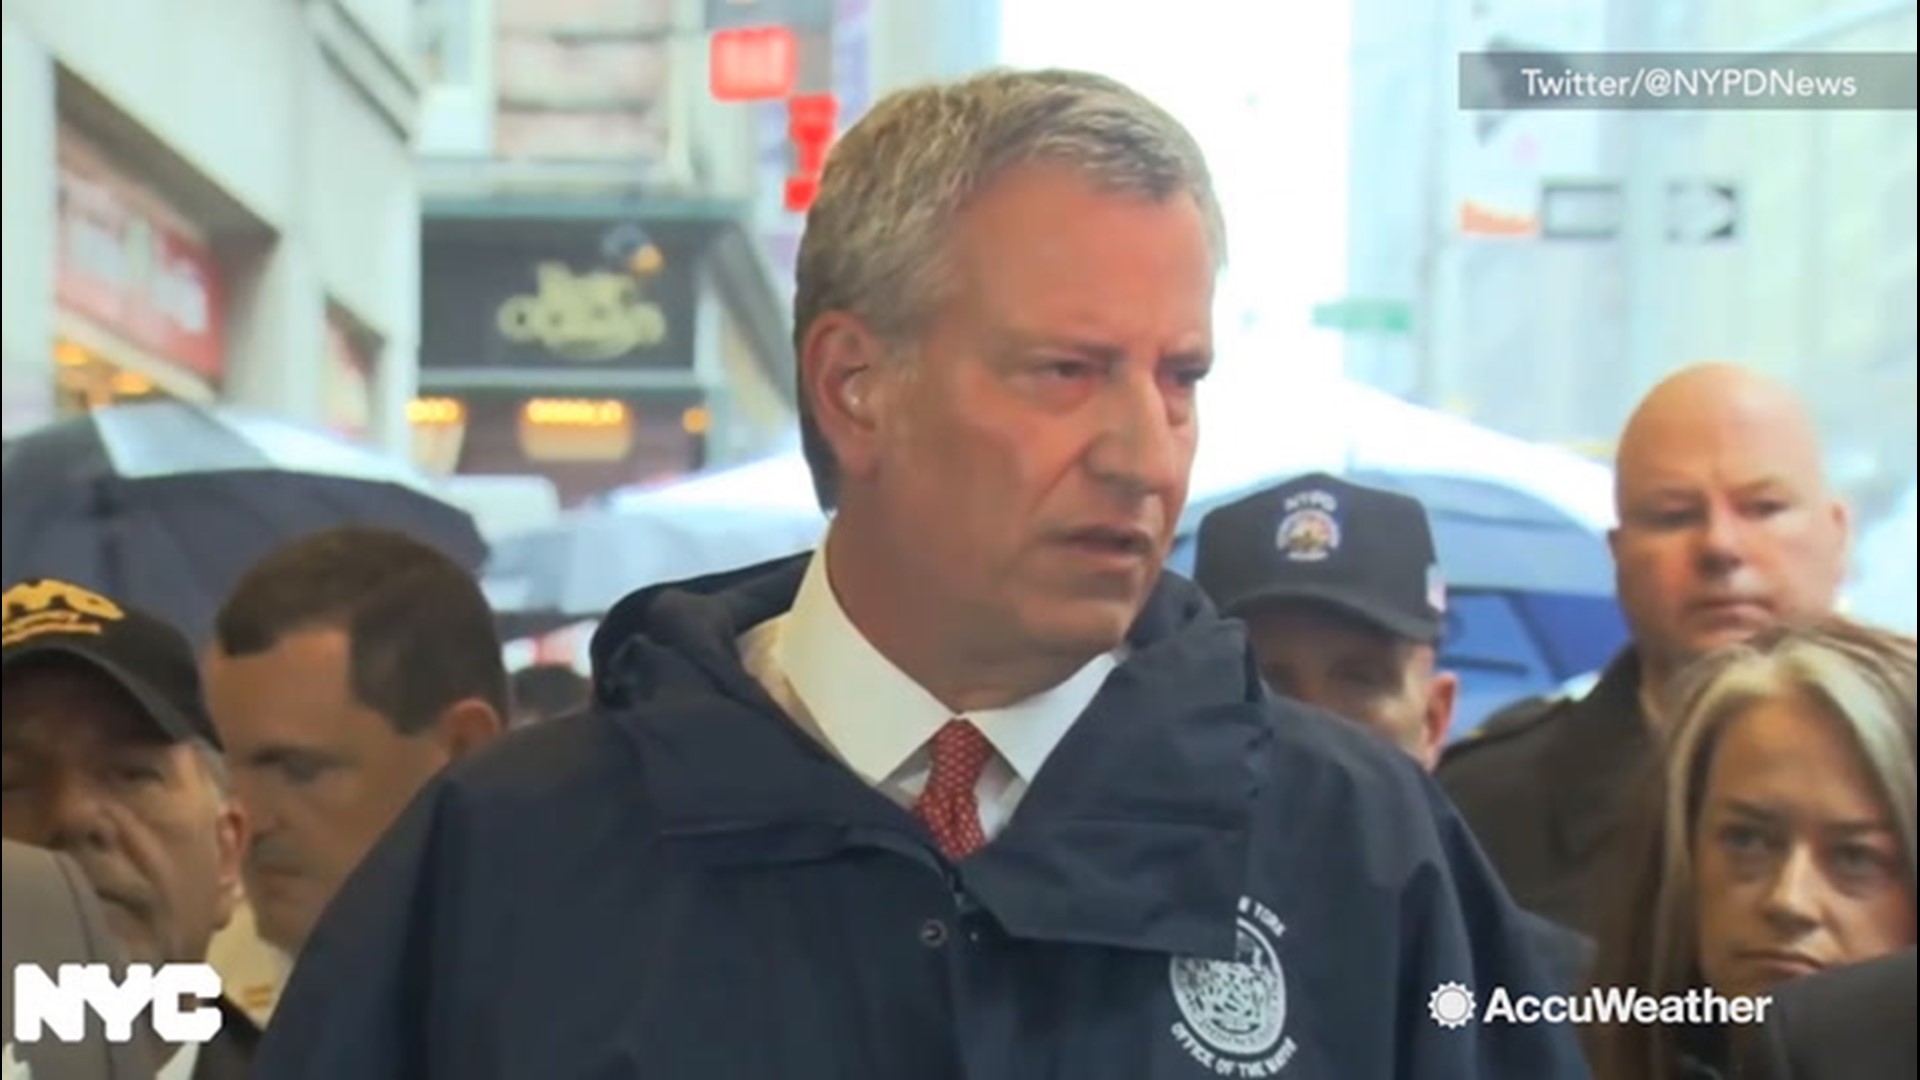 After a private helicopter crashed in New York, New York on June 10, Mayor Bill de Blasio said the cause was unknown but that there was no apparent terrorist connection.